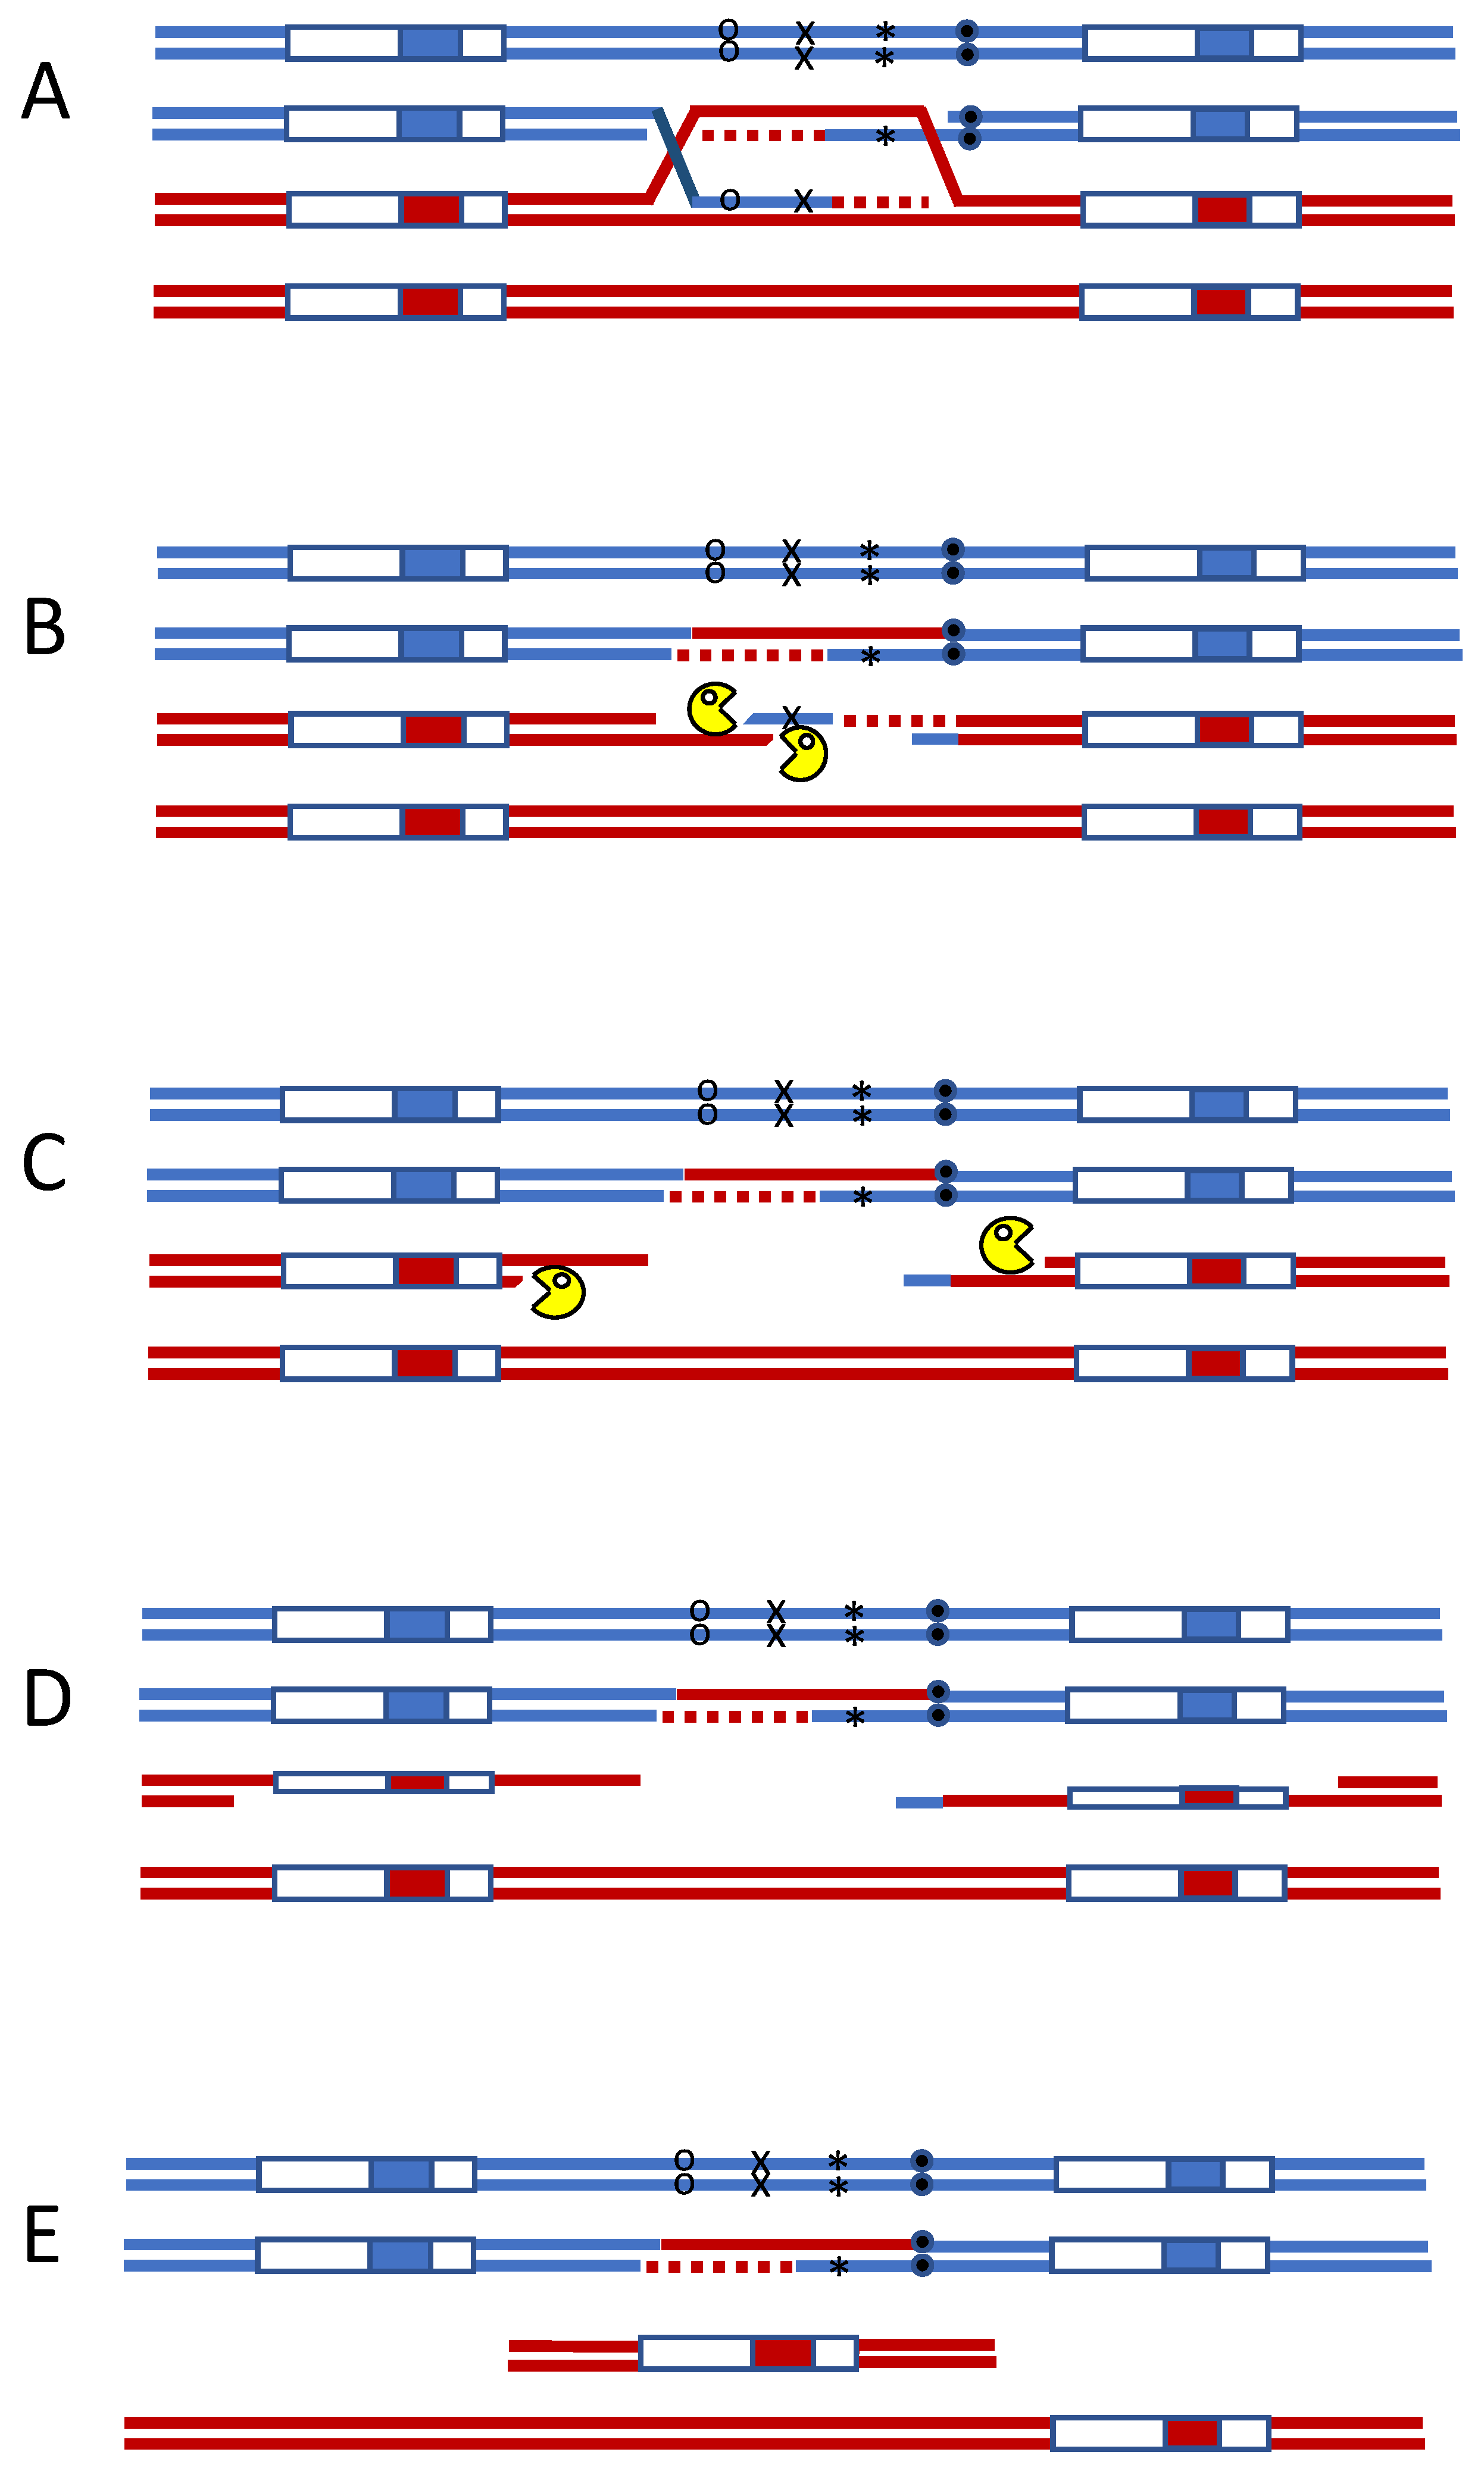 Gene replacement by double-crossover recombination in R. marinus. (A)